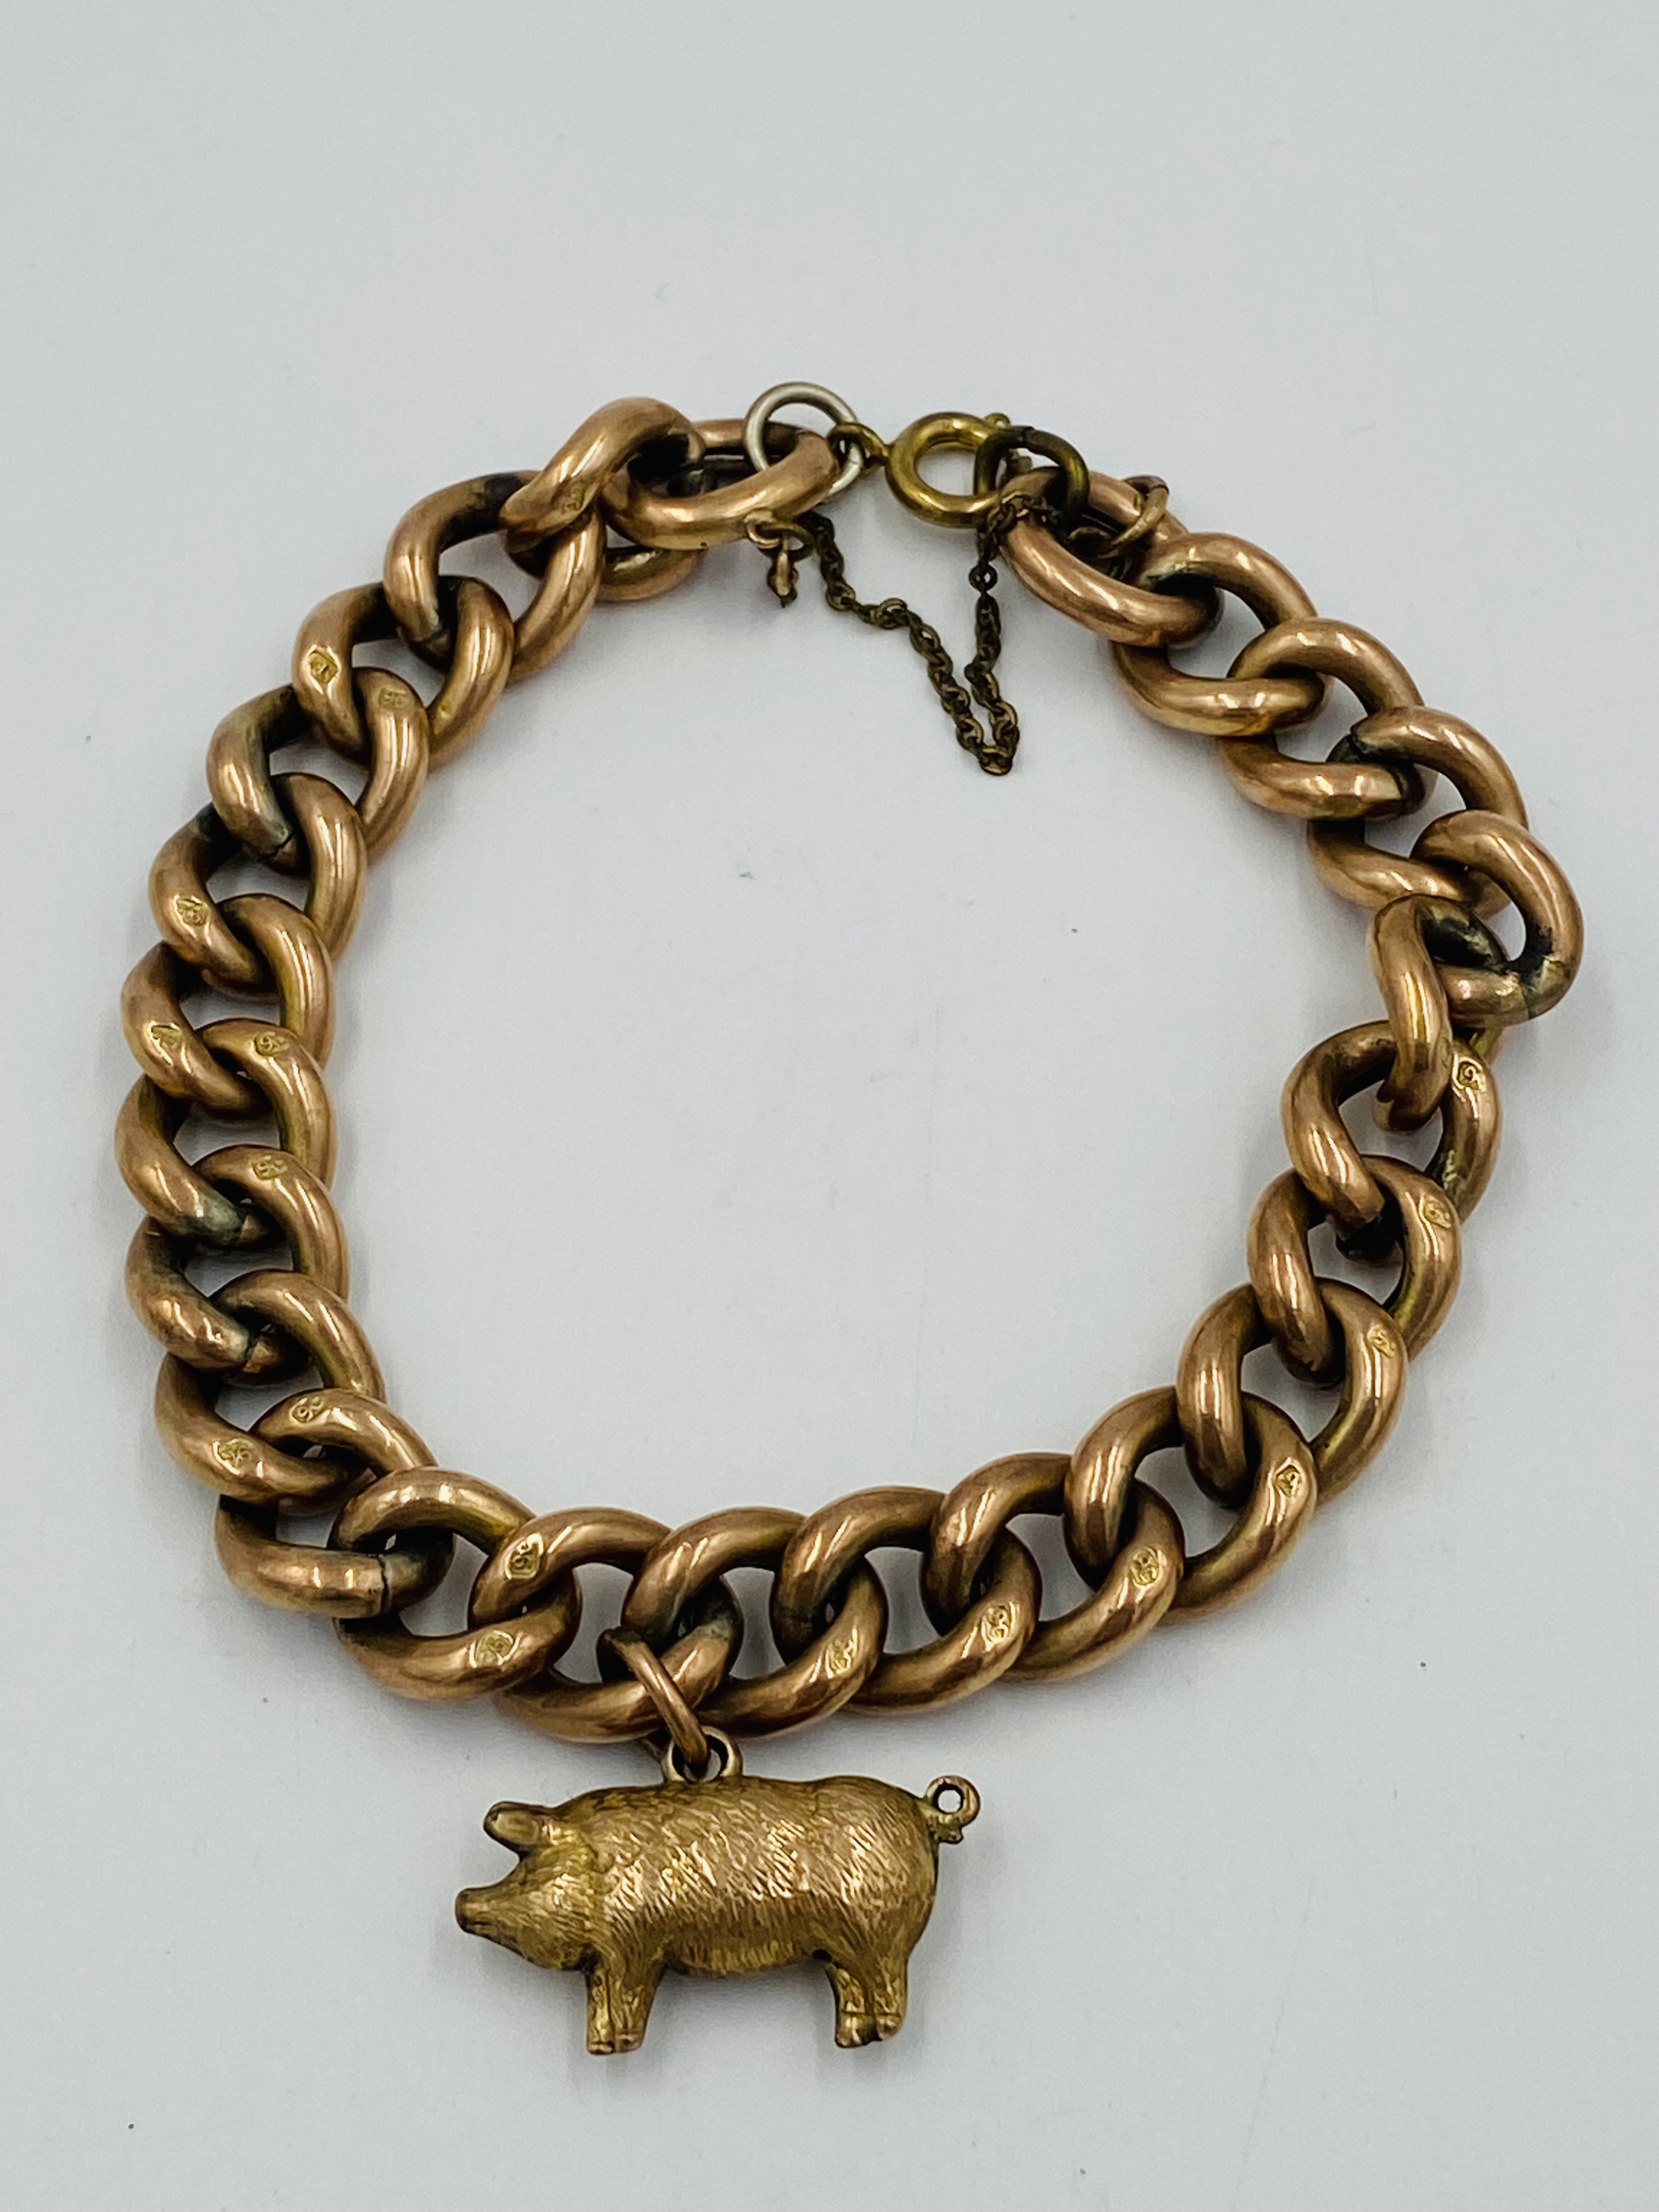 9ct gold bracelet with pig charm - Image 2 of 4